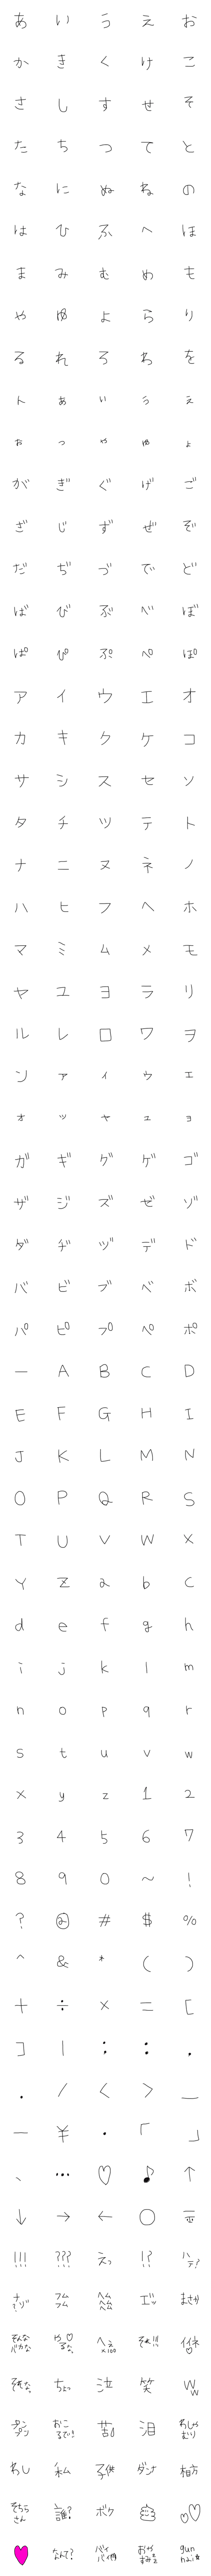 [LINE絵文字]文字 絵文字 全部の画像一覧